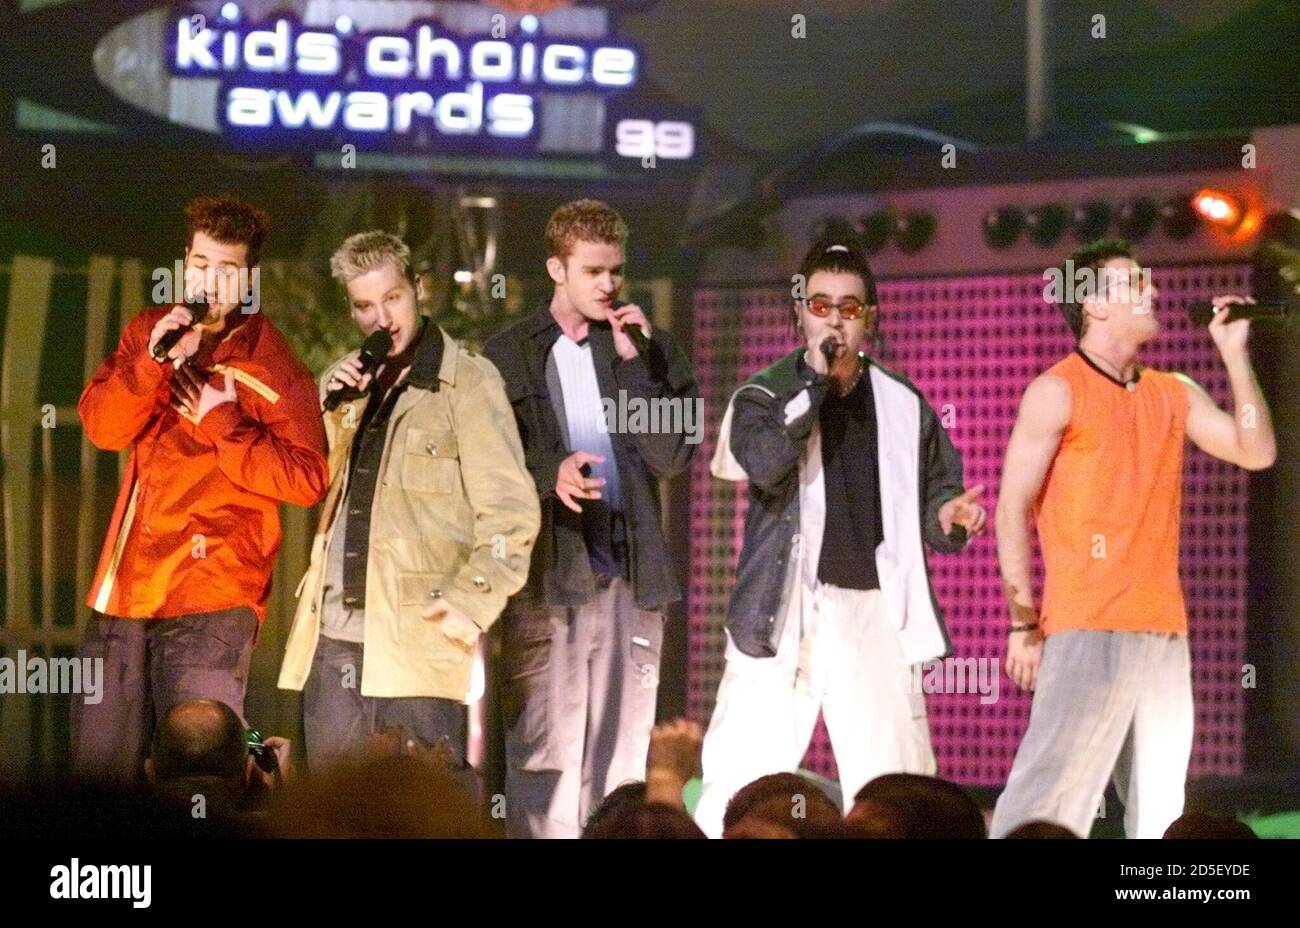 Members of the pop music group N'Sync perform during the 12th annual Kids'Choice  Awards, May 1 in Los Angeles. The group won a Kids' Choice Award as  Favorite Group at the show.